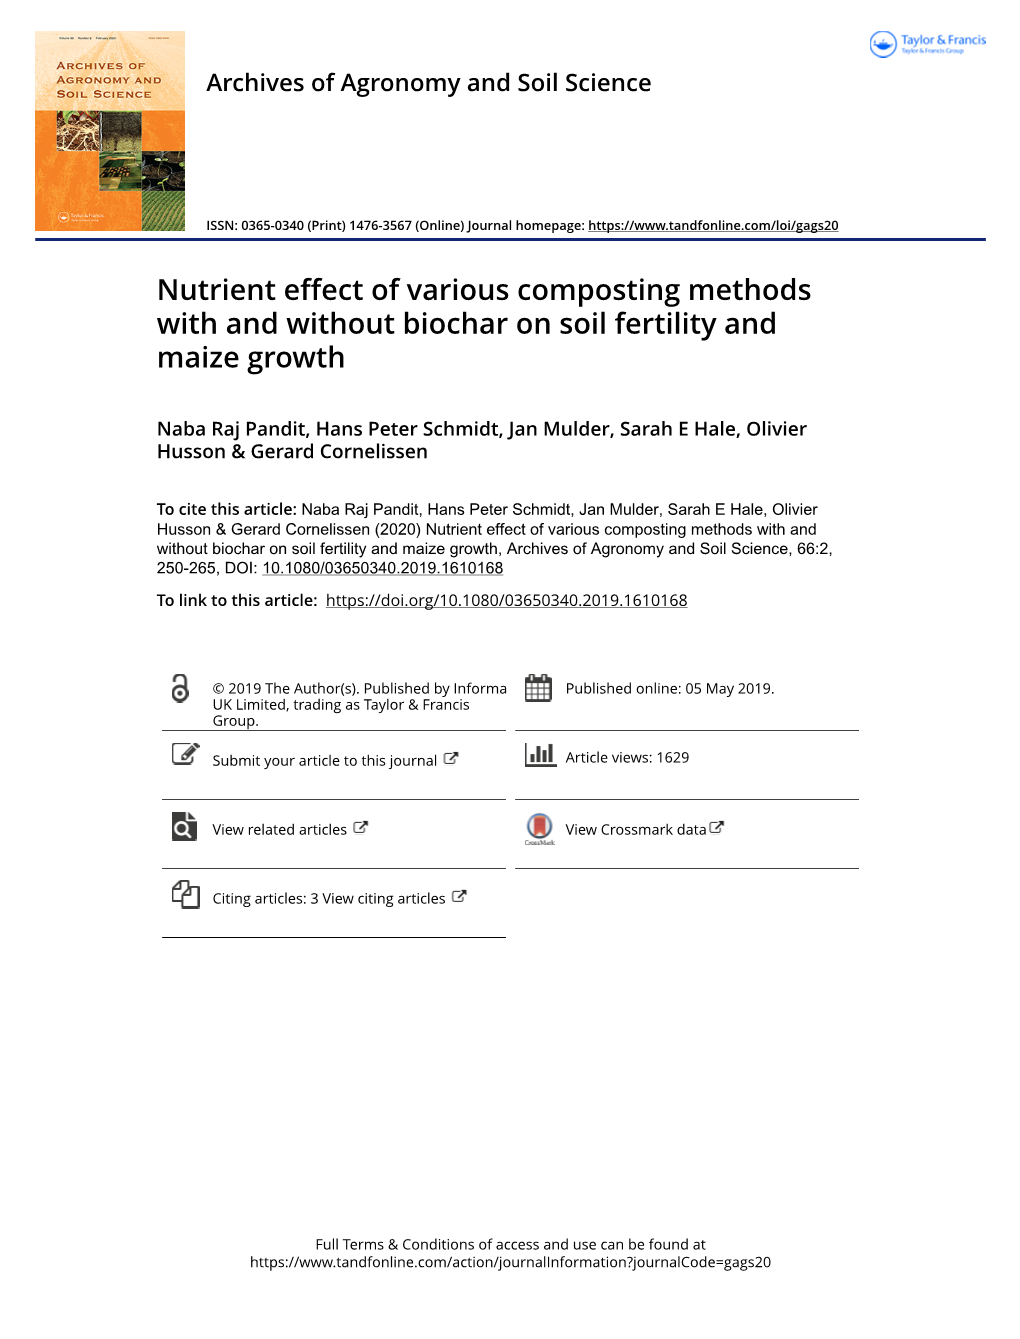 Nutrient Effect of Various Composting Methods with and Without Biochar on Soil Fertility and Maize Growth